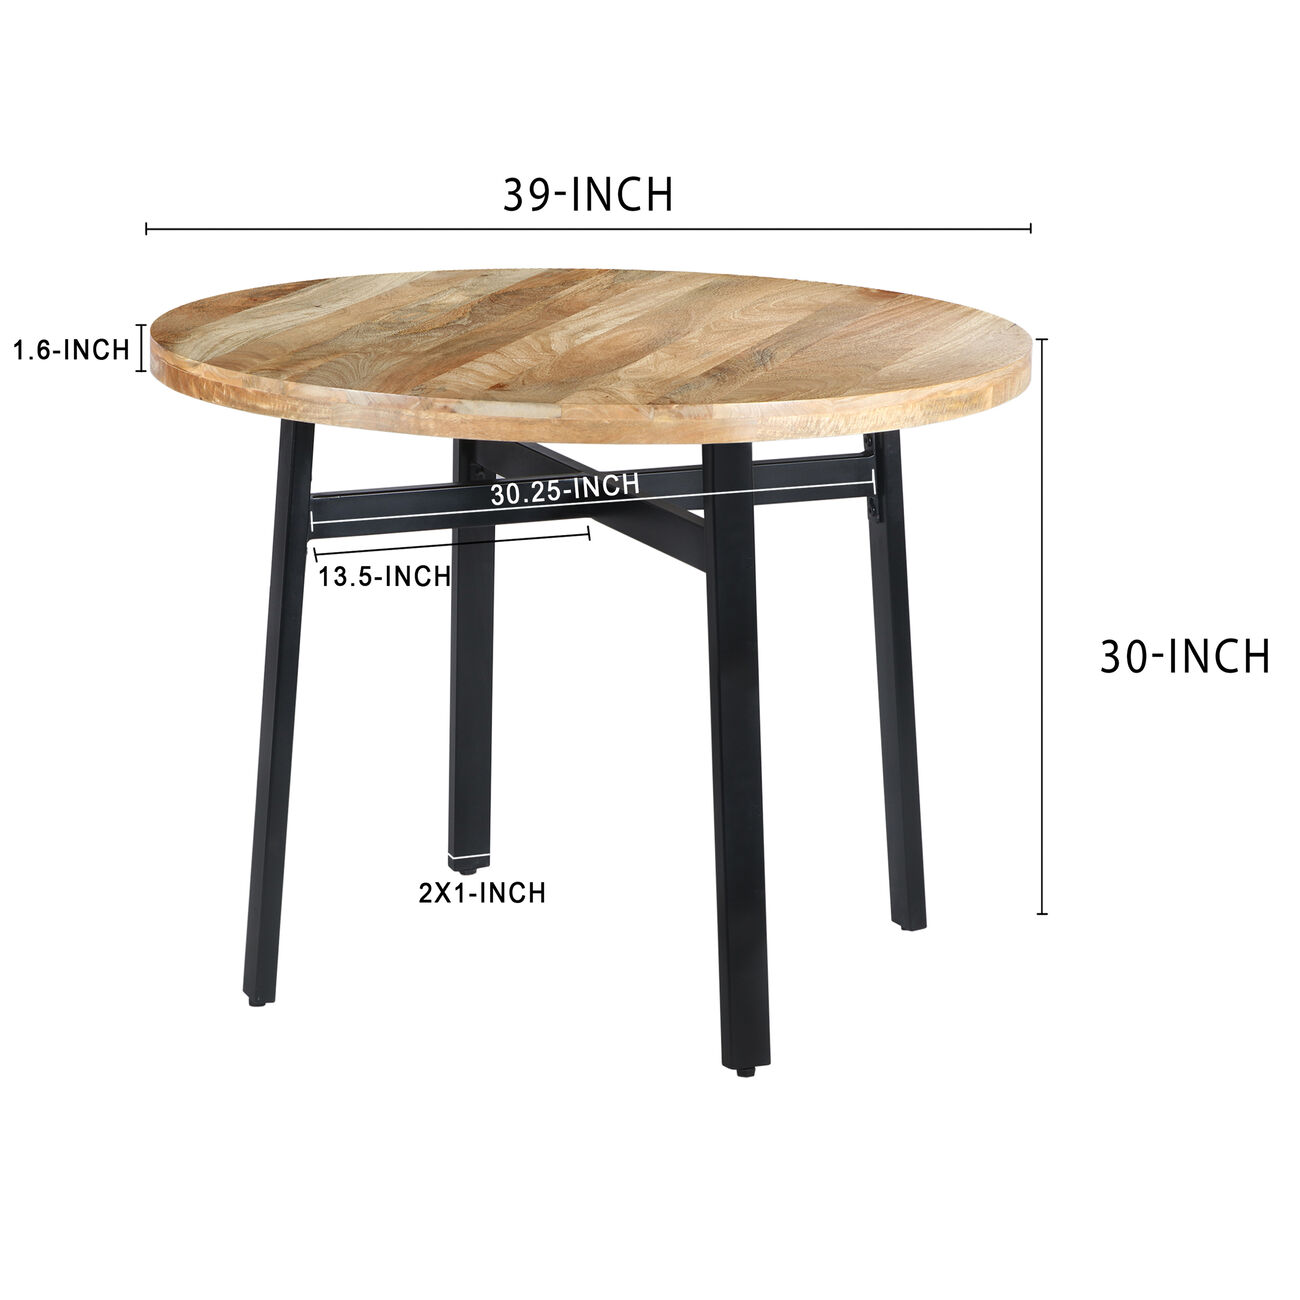 39 Inch Round Mango Wood Dining Table with Angled Iron Leg Support, Brown and Black